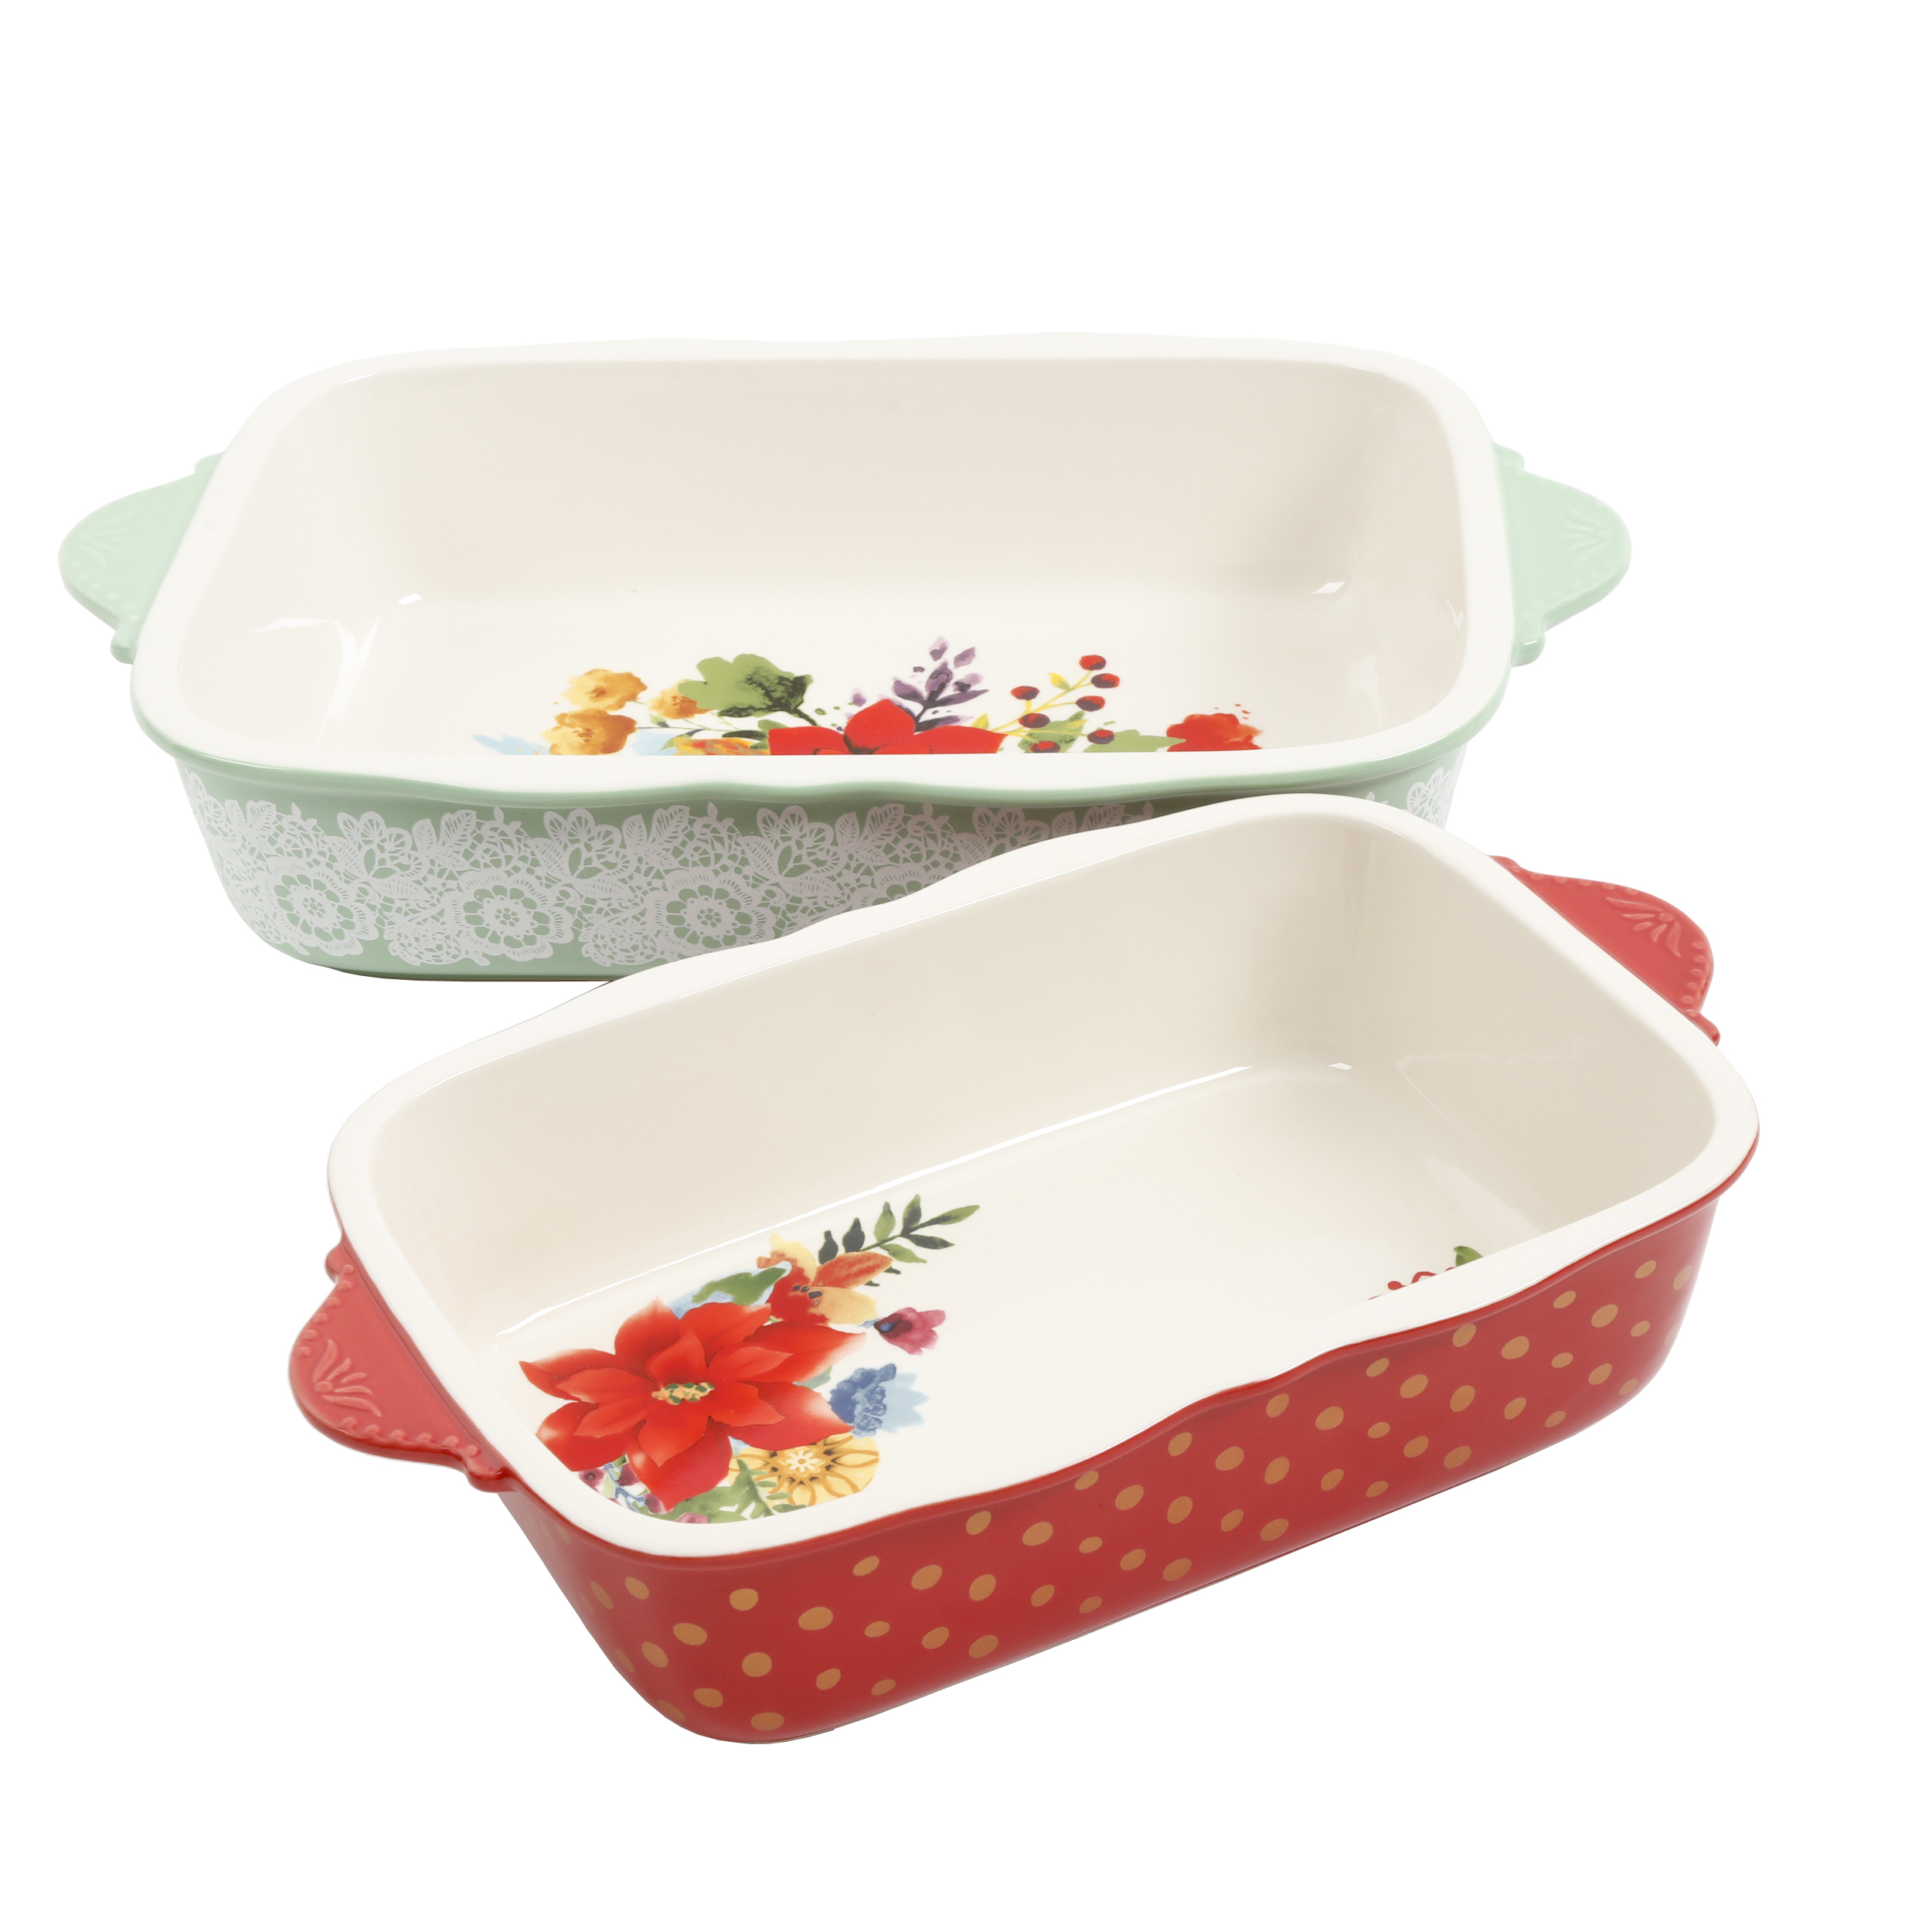 The Pioneer Woman Frost 2-Piece Bakeware Set - image 2 of 7